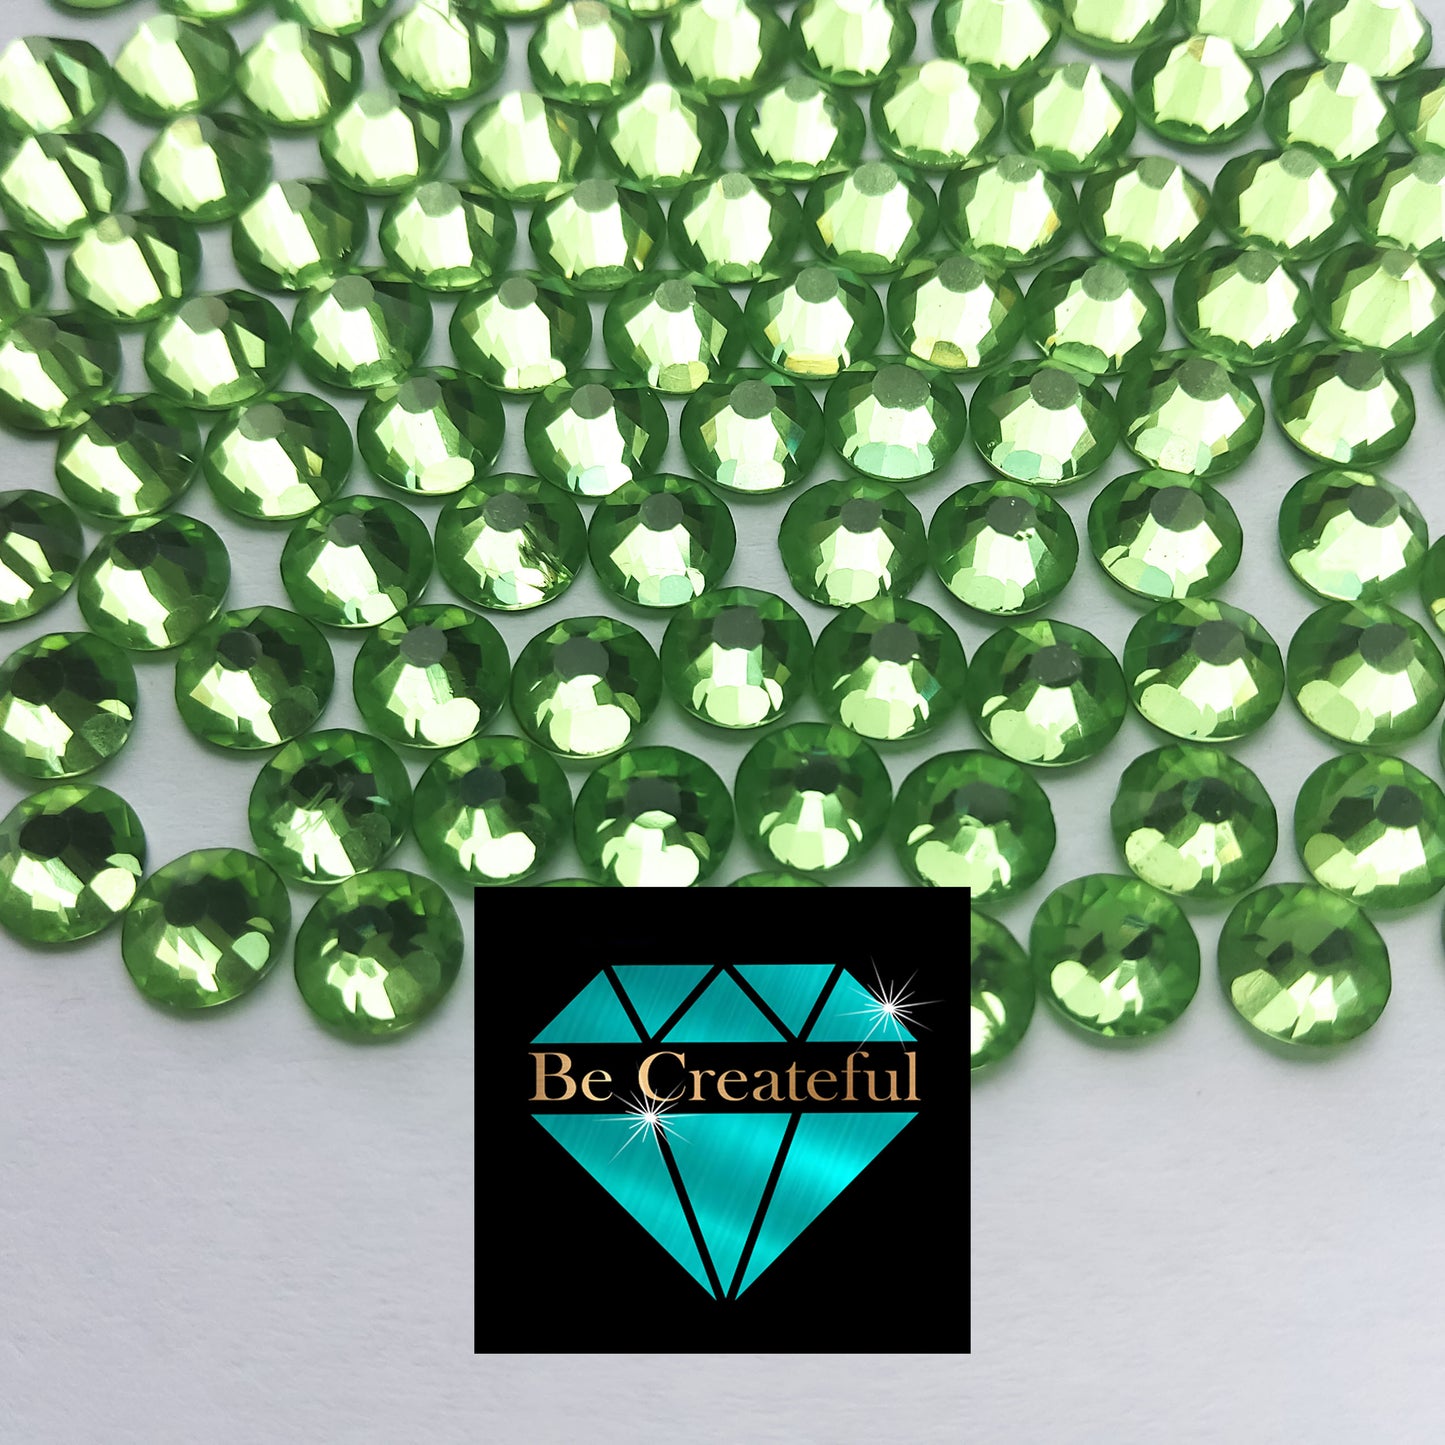 Be Createful LUXE® Peridot Green Hotfix Rhinestones are high-quality 14-16 facet glass Rhinestone that provides intense sparkle and refraction. LUXE® Hotfix rhinestones are known for their brilliant sparkle, made possible with their precision-cut facets. LUXE® Rhinestones provide high-end sparkle without the high-end prices.